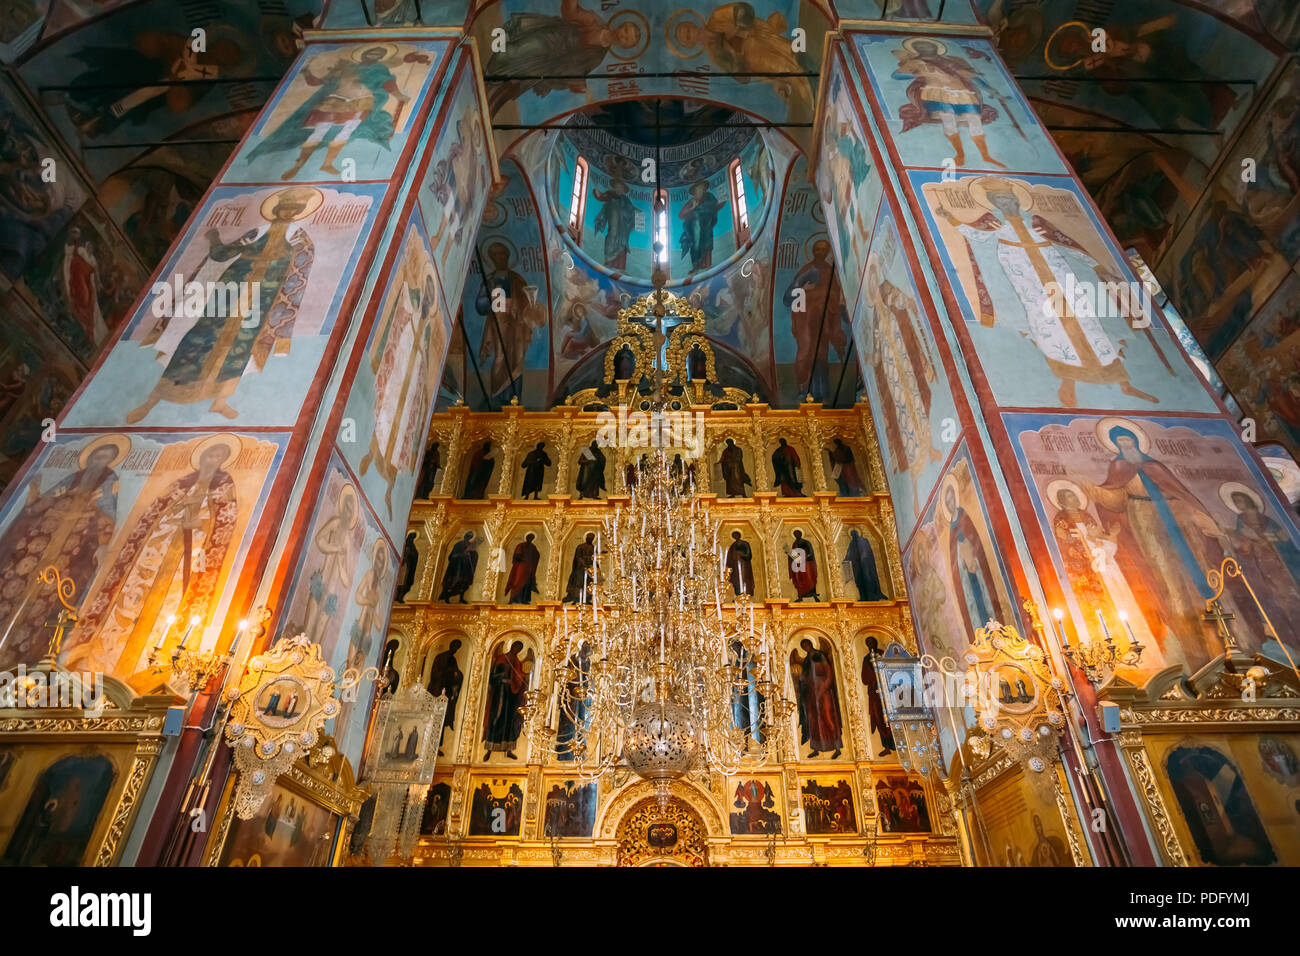 Sergiev posad, Russia - May 23, 2015: Interior Of Dormition (Assumption) Cathedral (1559 - 1585) in the Trinity Lavra of St. Sergius Stock Photo